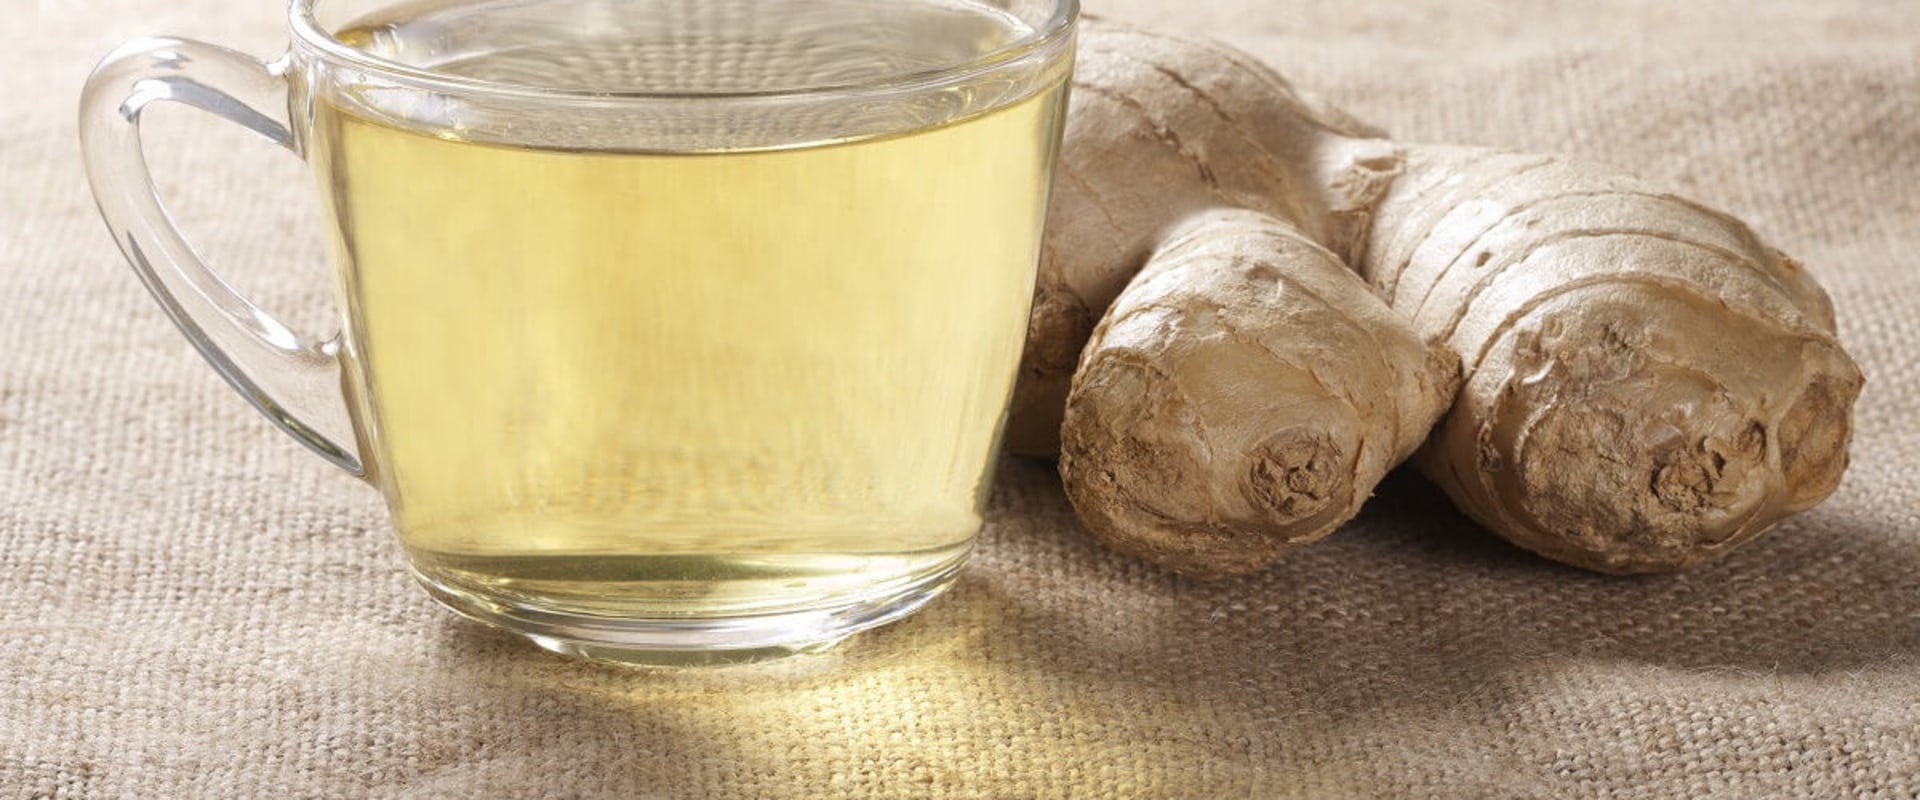 Ginger Detoxification: A Natural Way to Improve Your Health